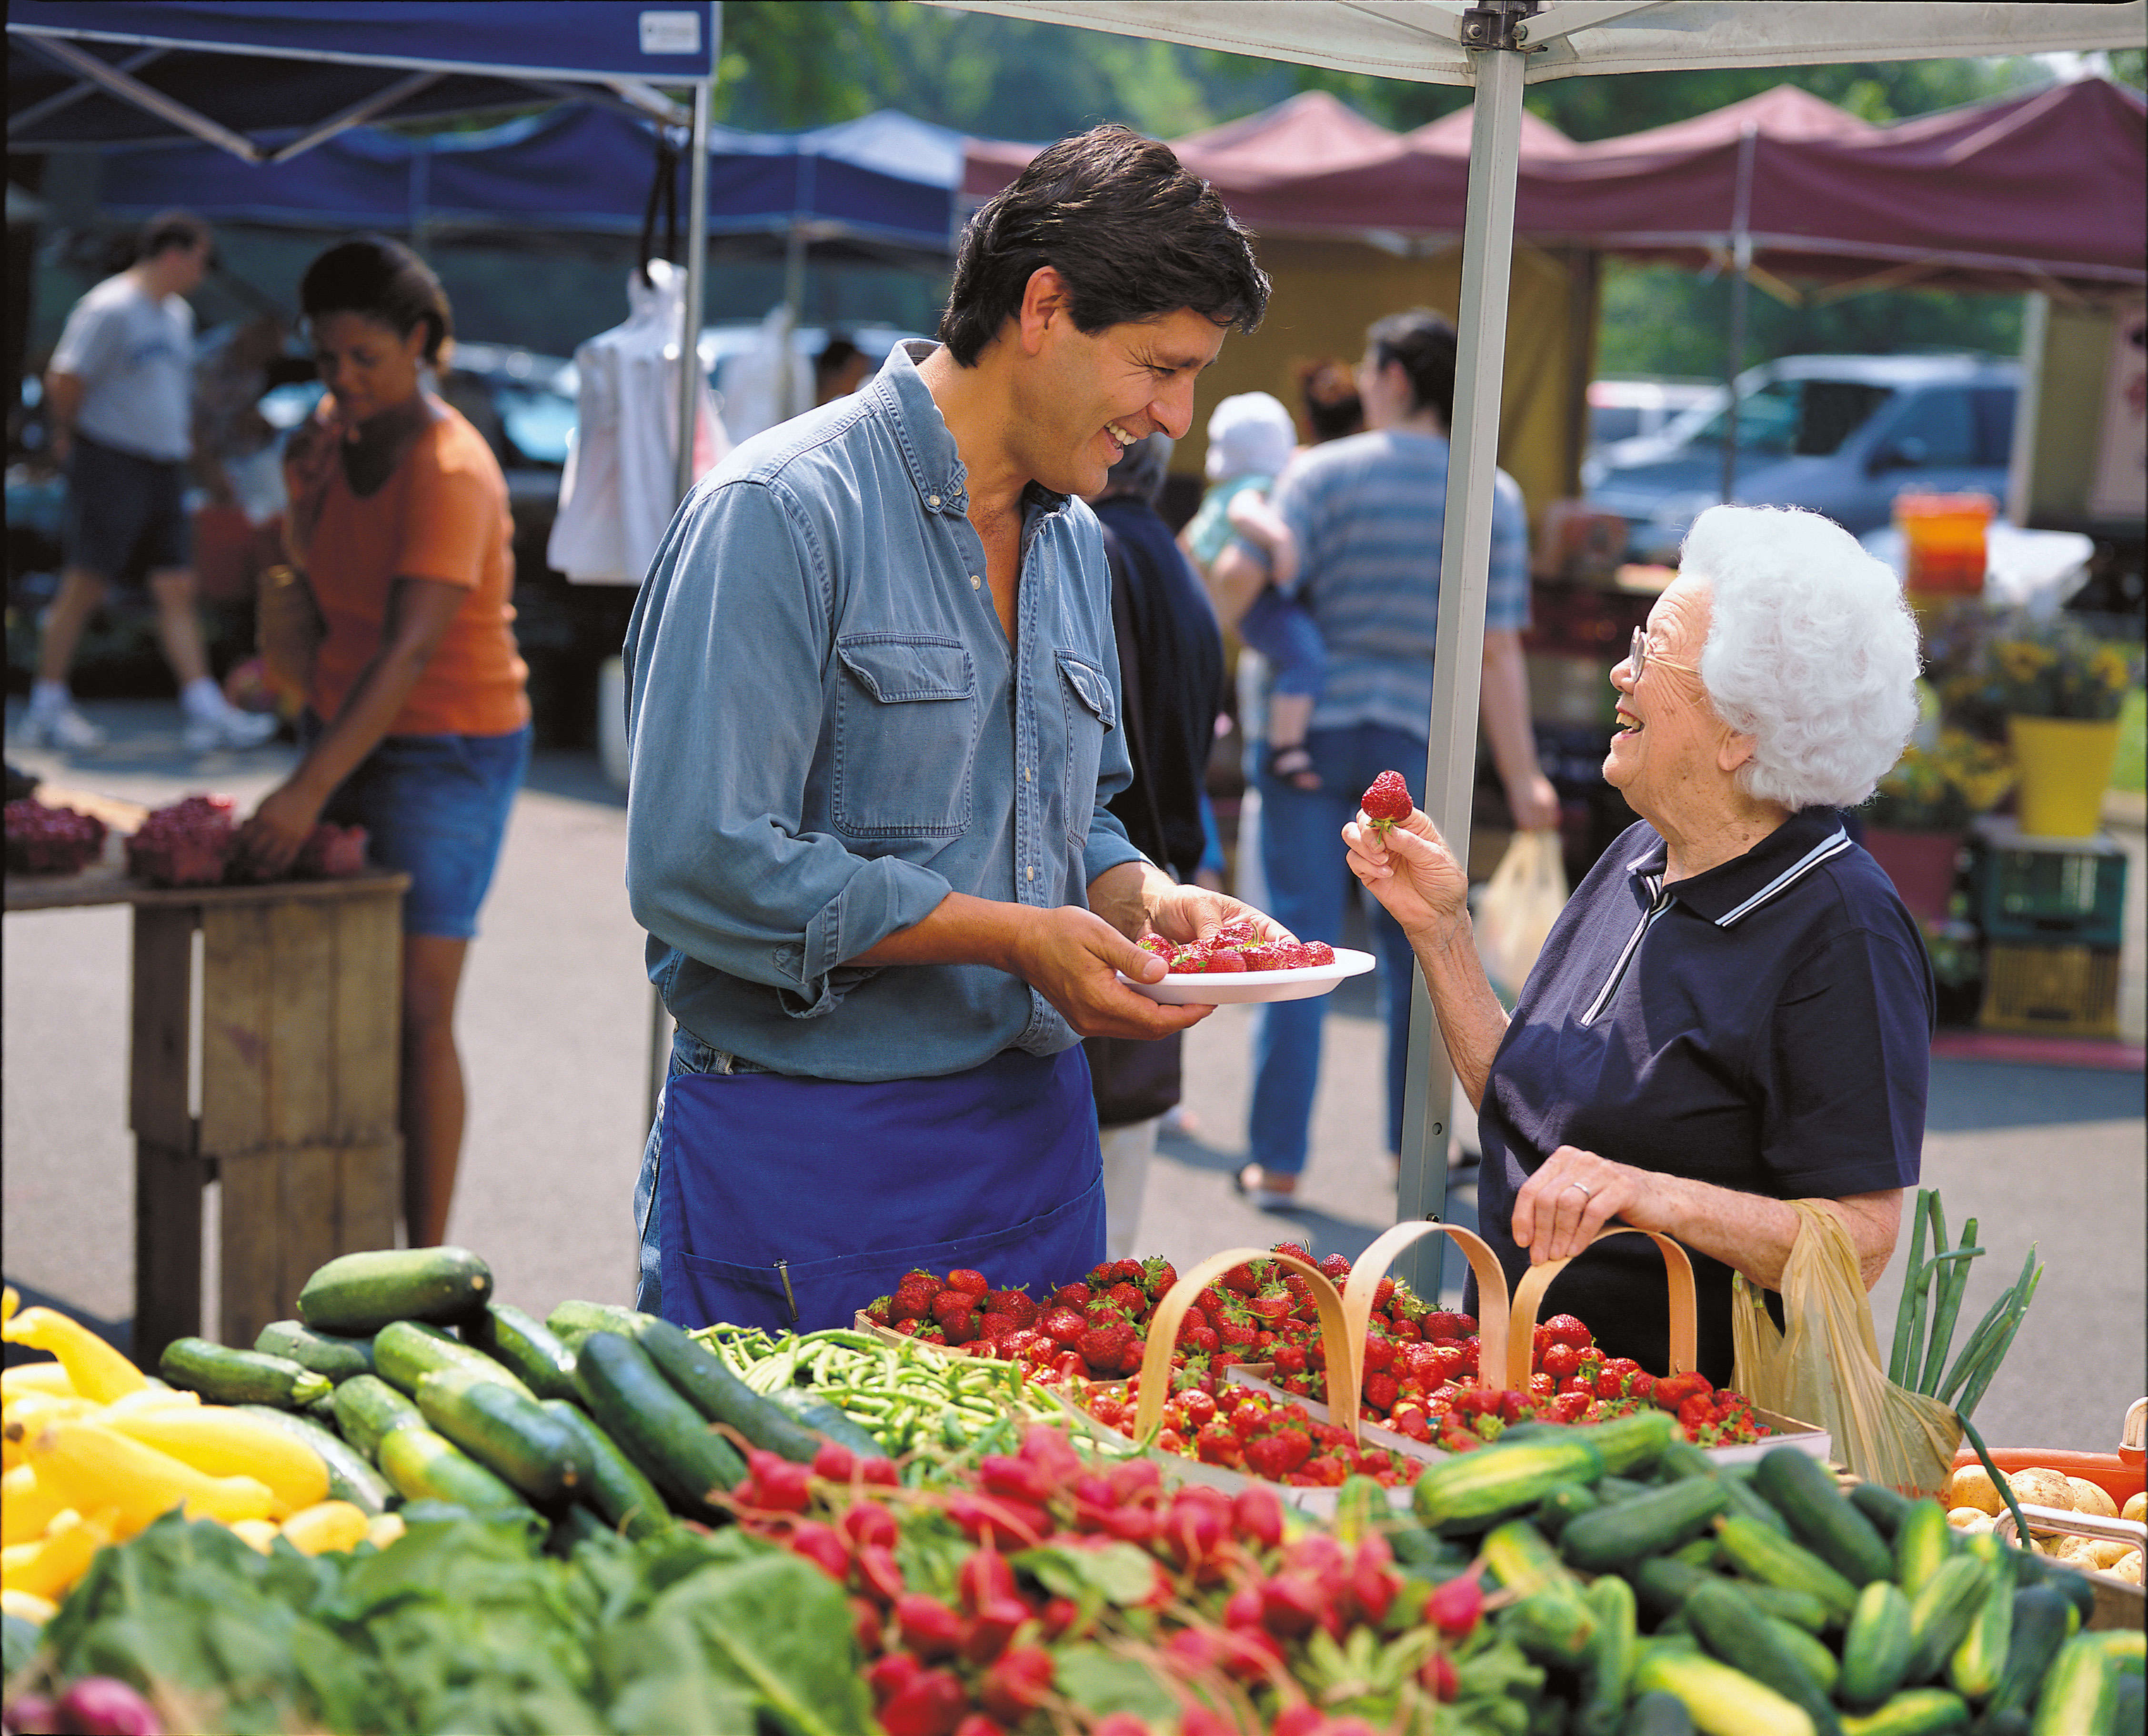 A male vendor serving a strawberry sample to an older woman at a farmers market stand.